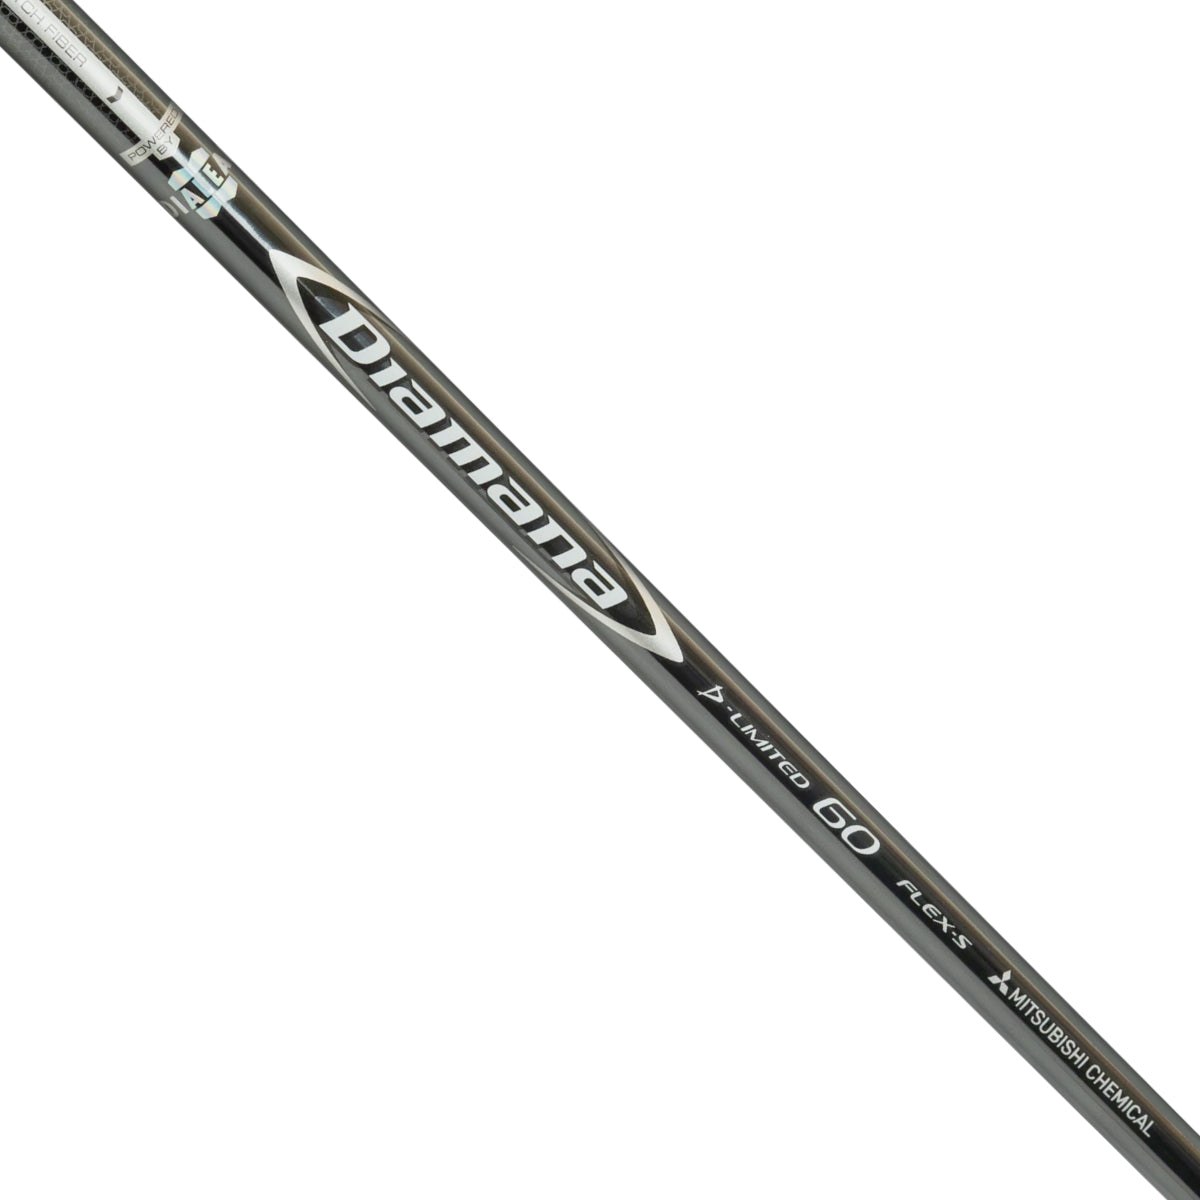 (Assembled) Mitsubishi Diamana D-Limited Graphite Shaft with Adapter Tip (Callaway / Cobra / Ping / Mizuno / TaylorMade / Titleist) + Grip